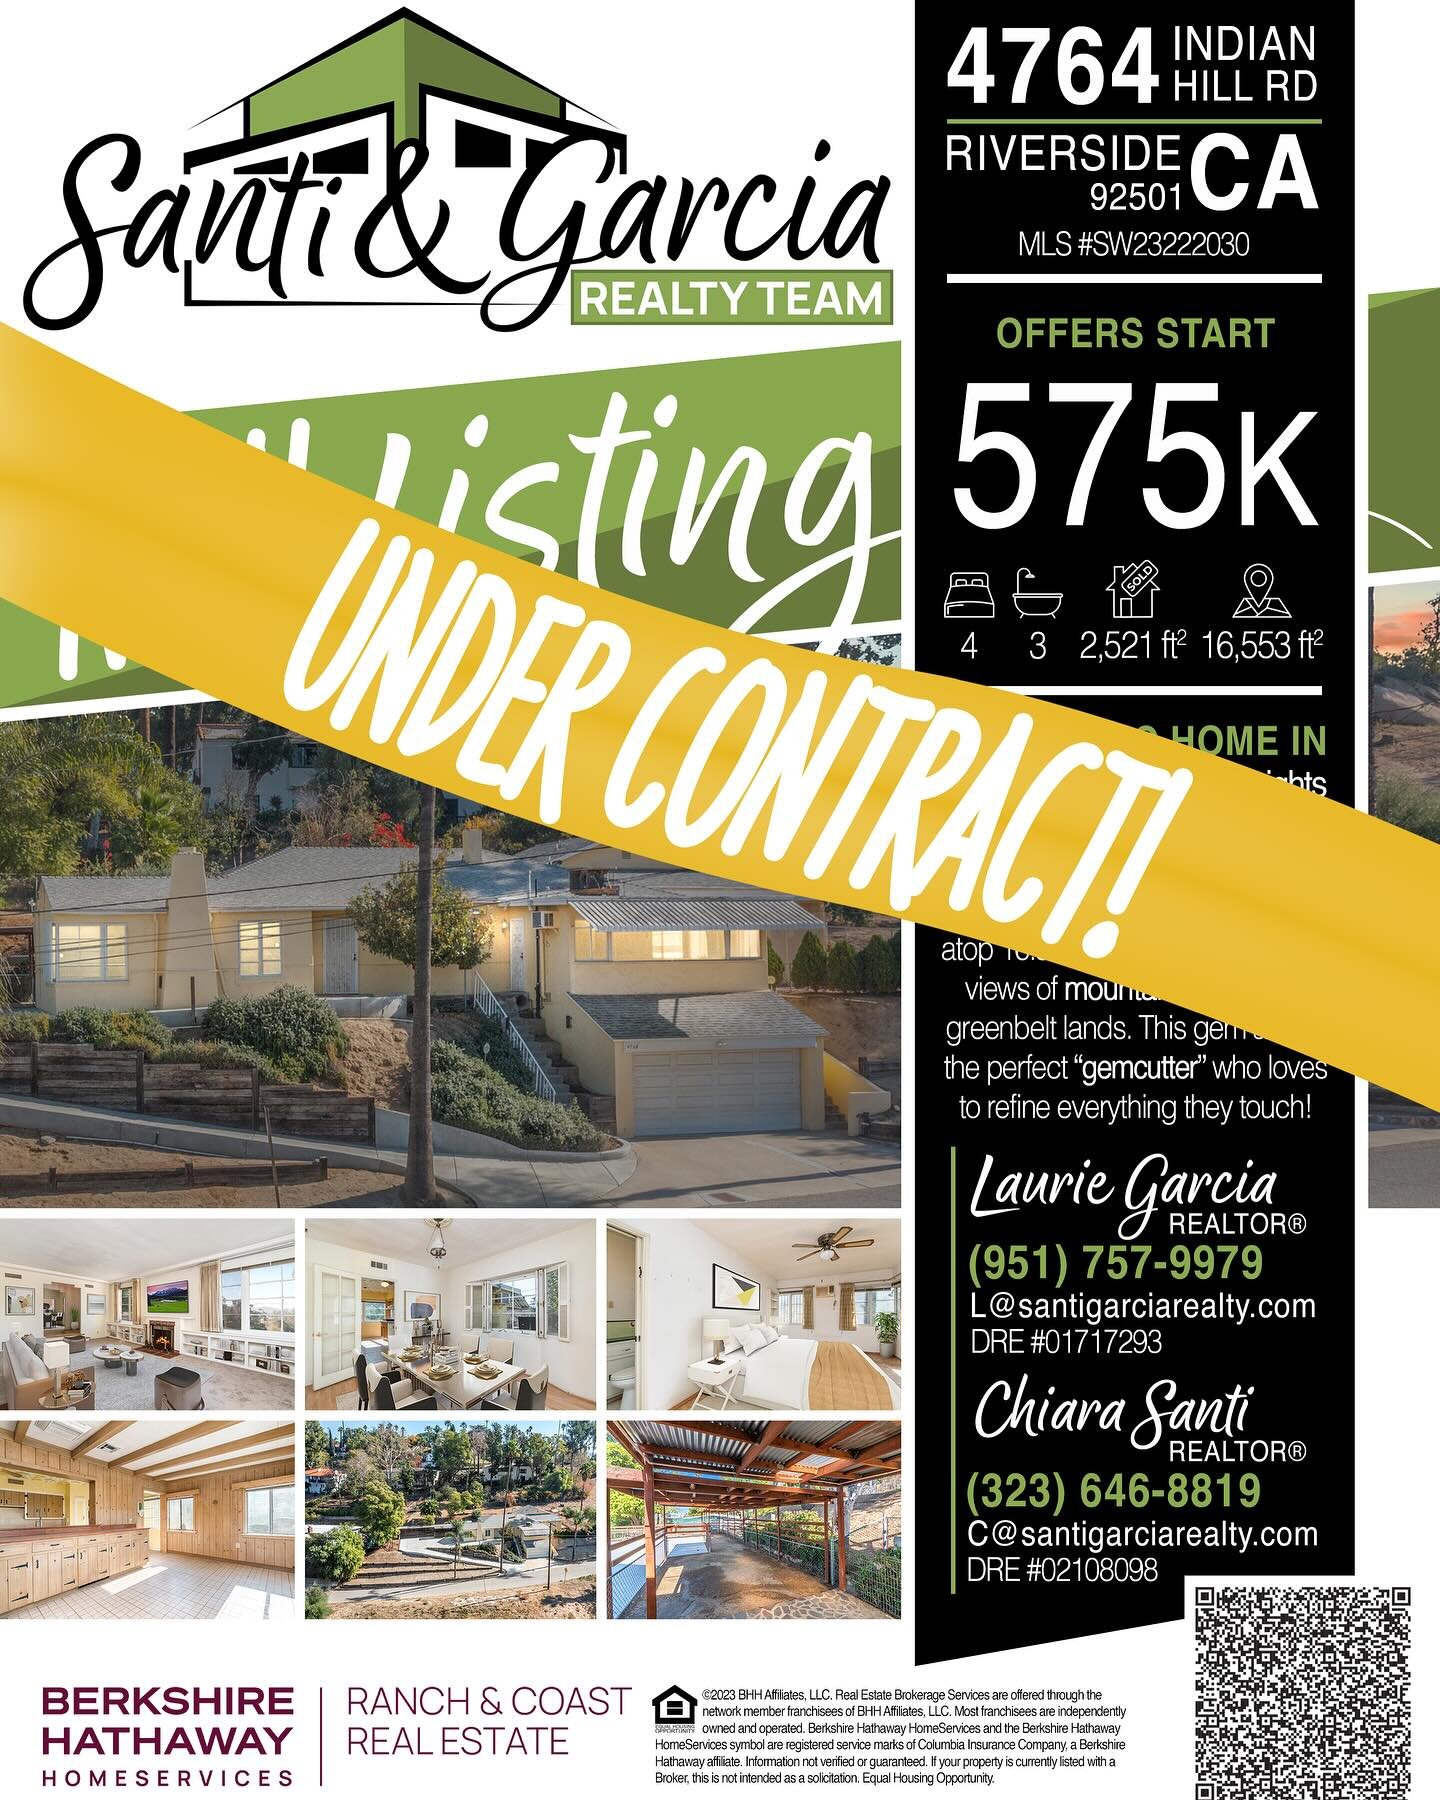 ✍️UNDER CONTRACT‼️

📍4764 Indian Hill Rd. Riverside, CA 92501

👉More info at santigarciarealty.com

#SantiGarciaRealty #realestate #realtor #realty #carealestategroup #commercialrealestate #residentialrealestate